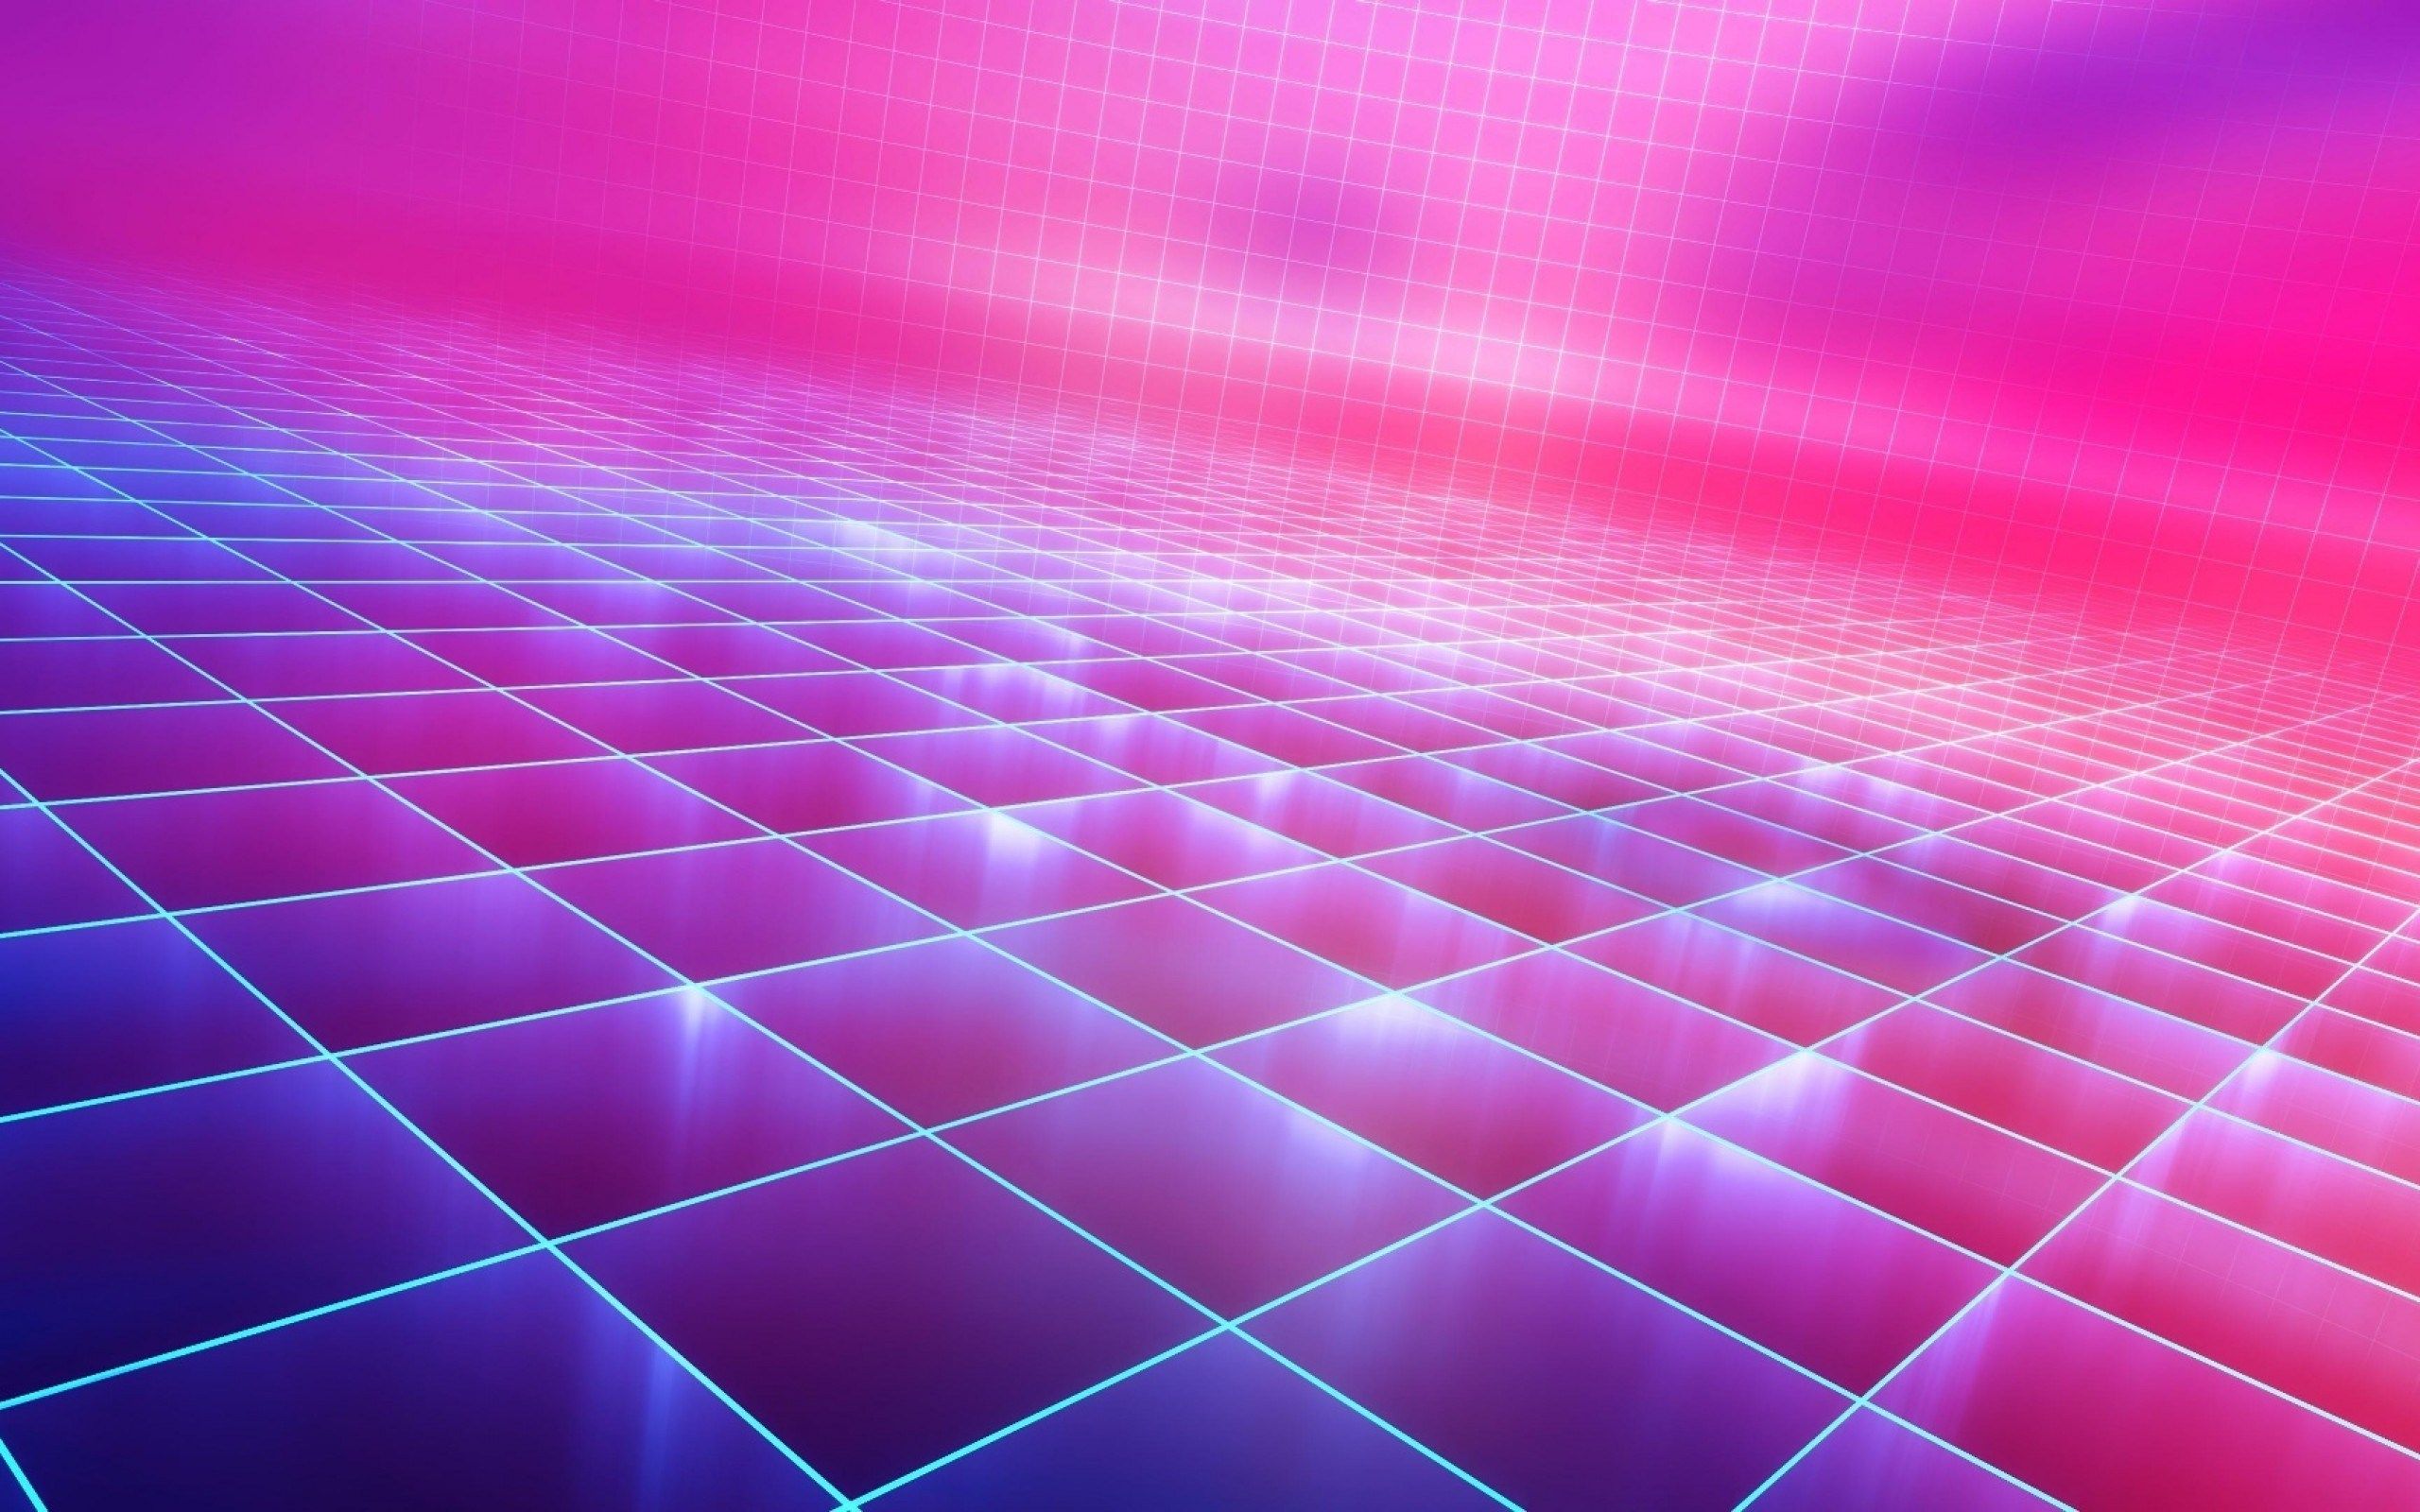 Synth Wave Wallpaper Pink Grid. Best NEW Wallpaper HD